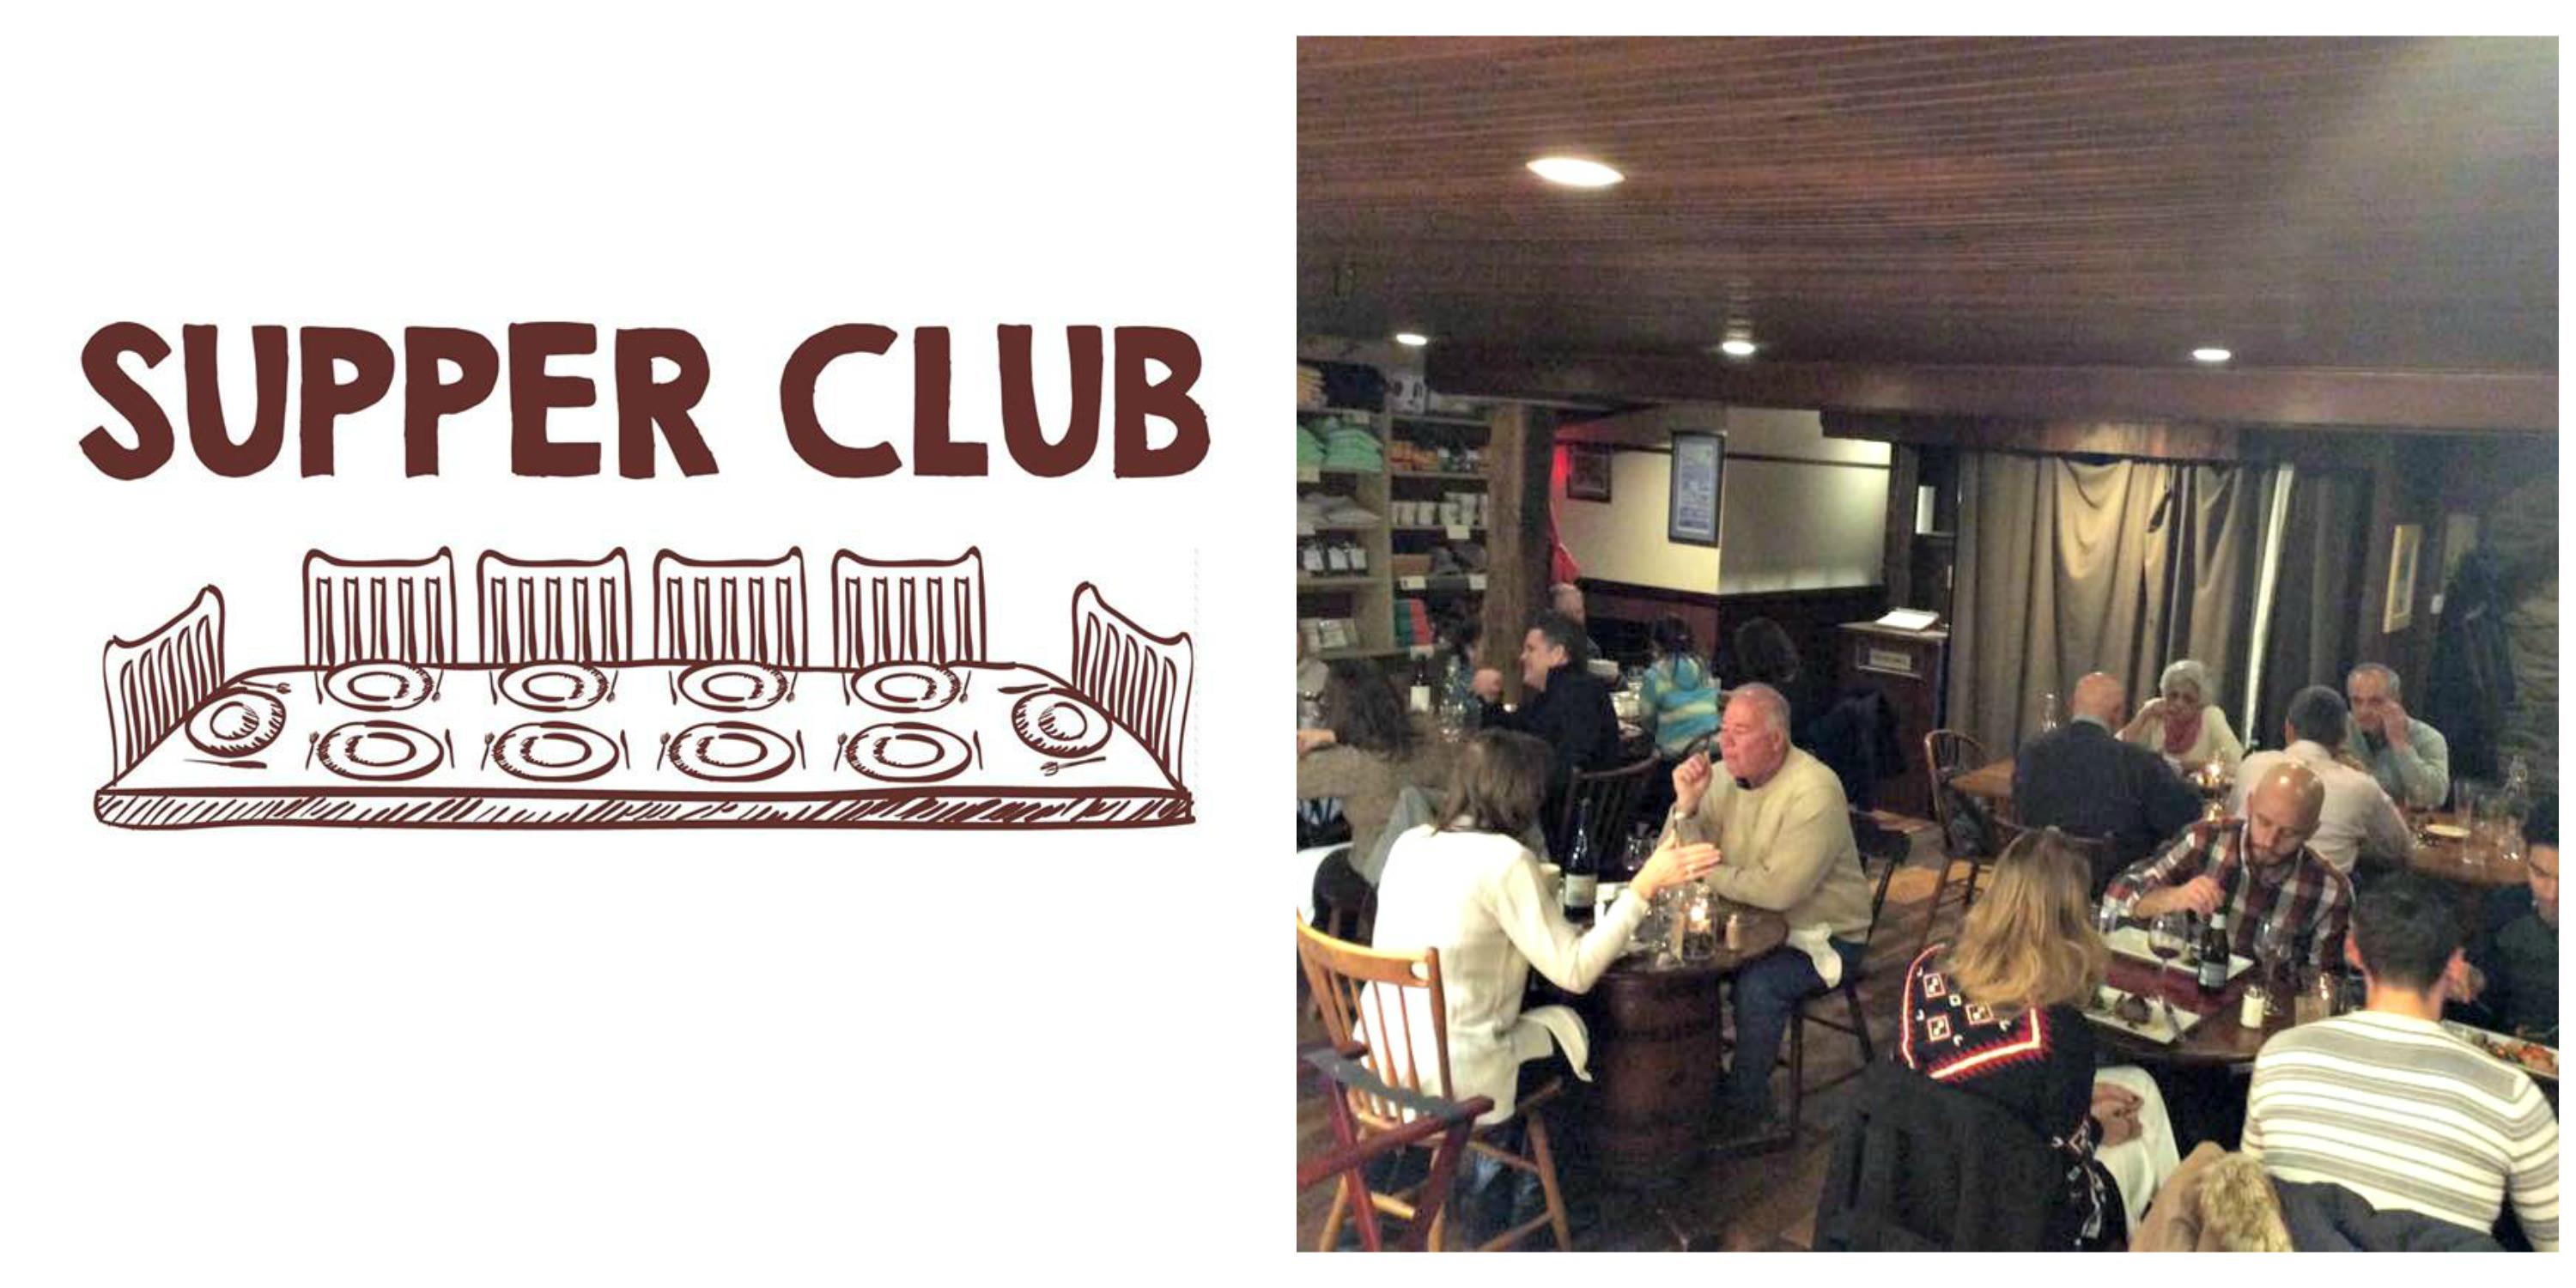 Supper Club at Lumberville General Store